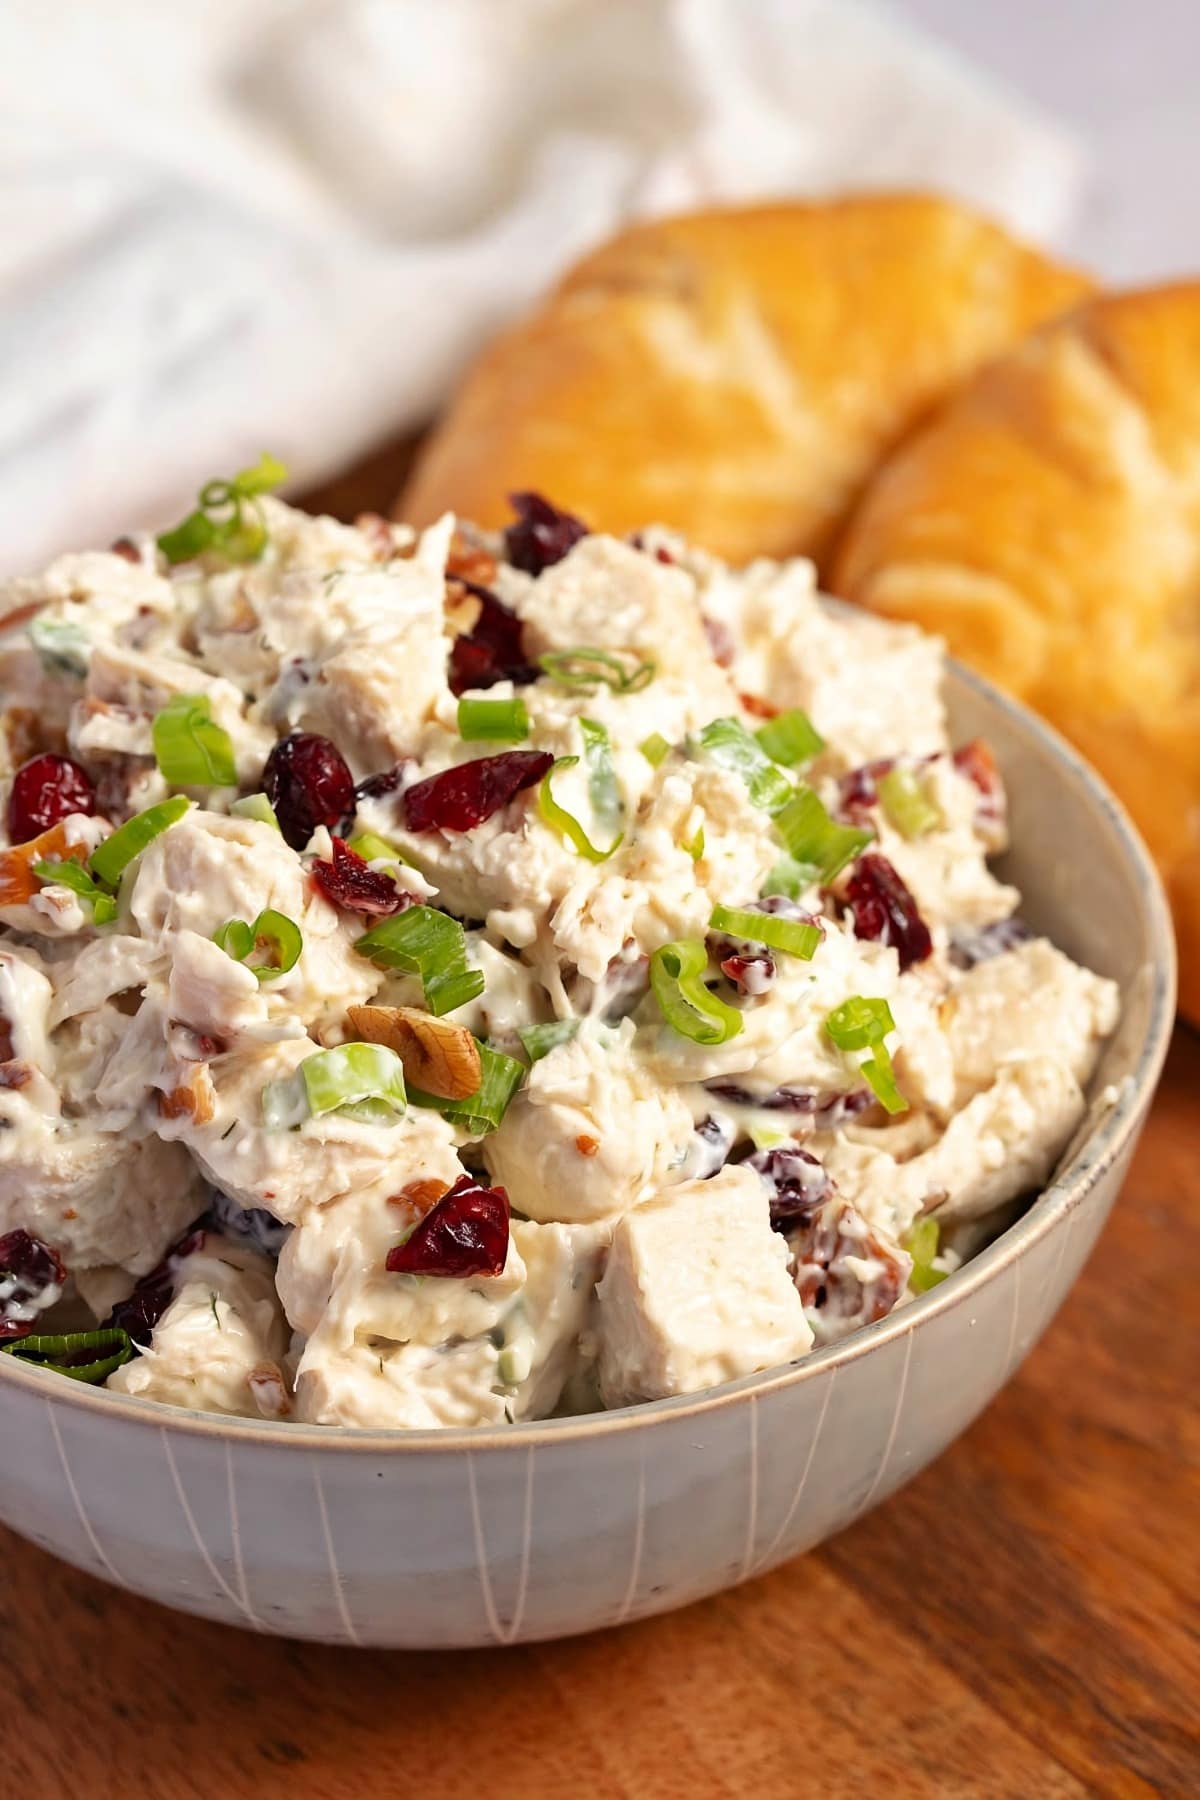 Cranberry Chicken Salad with Green Onions Served with Bread